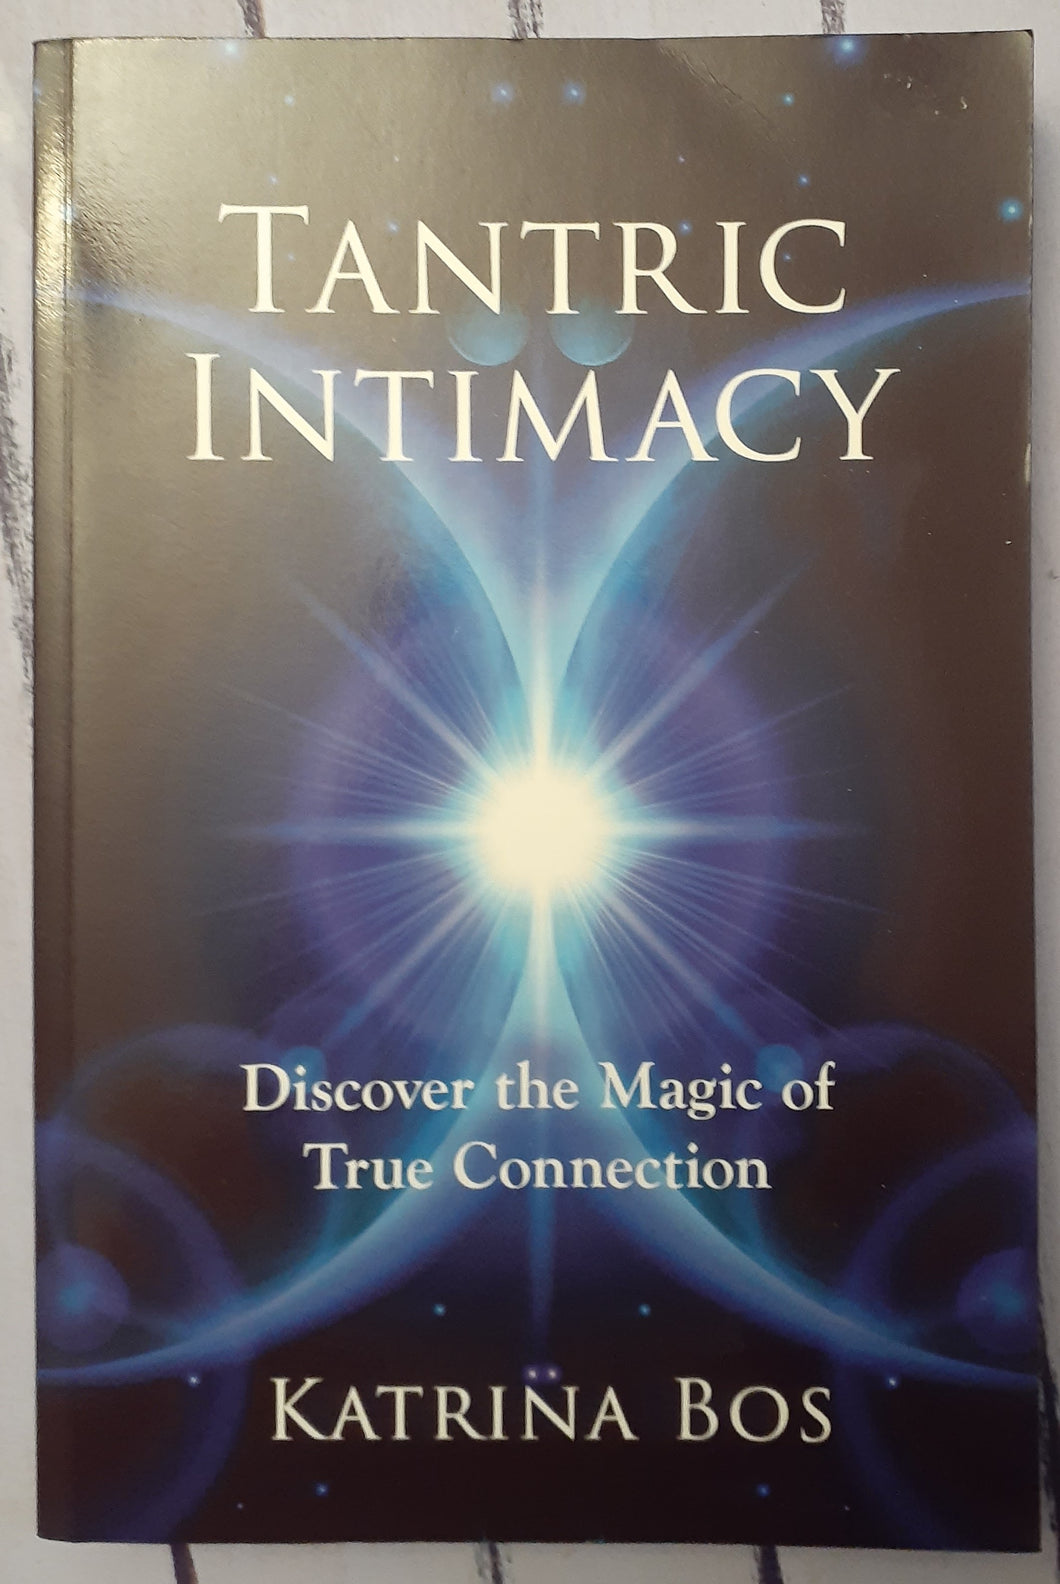 Tantric Intimacy: Discover the Magic of True Connection